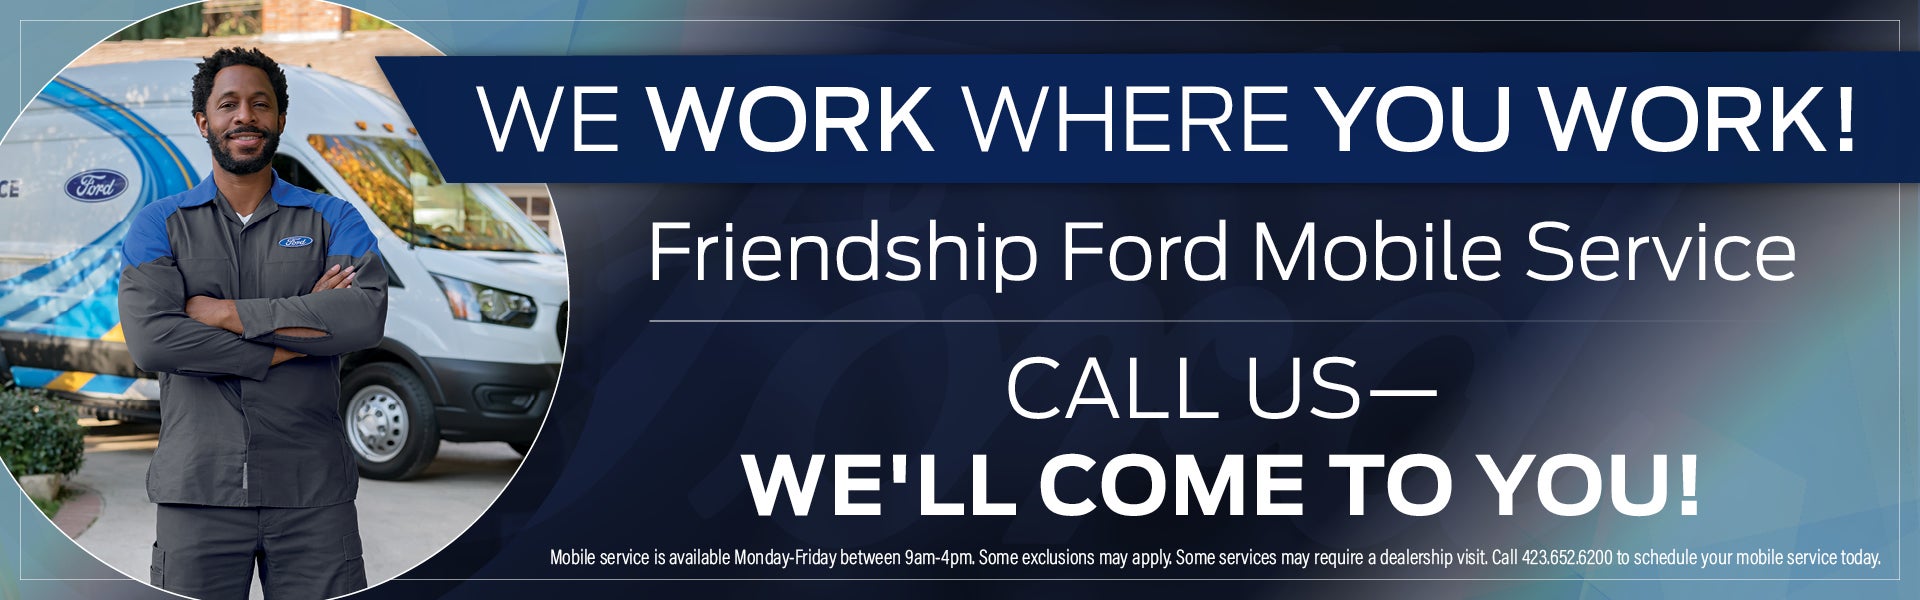 Schedule Service at Friendship Ford!